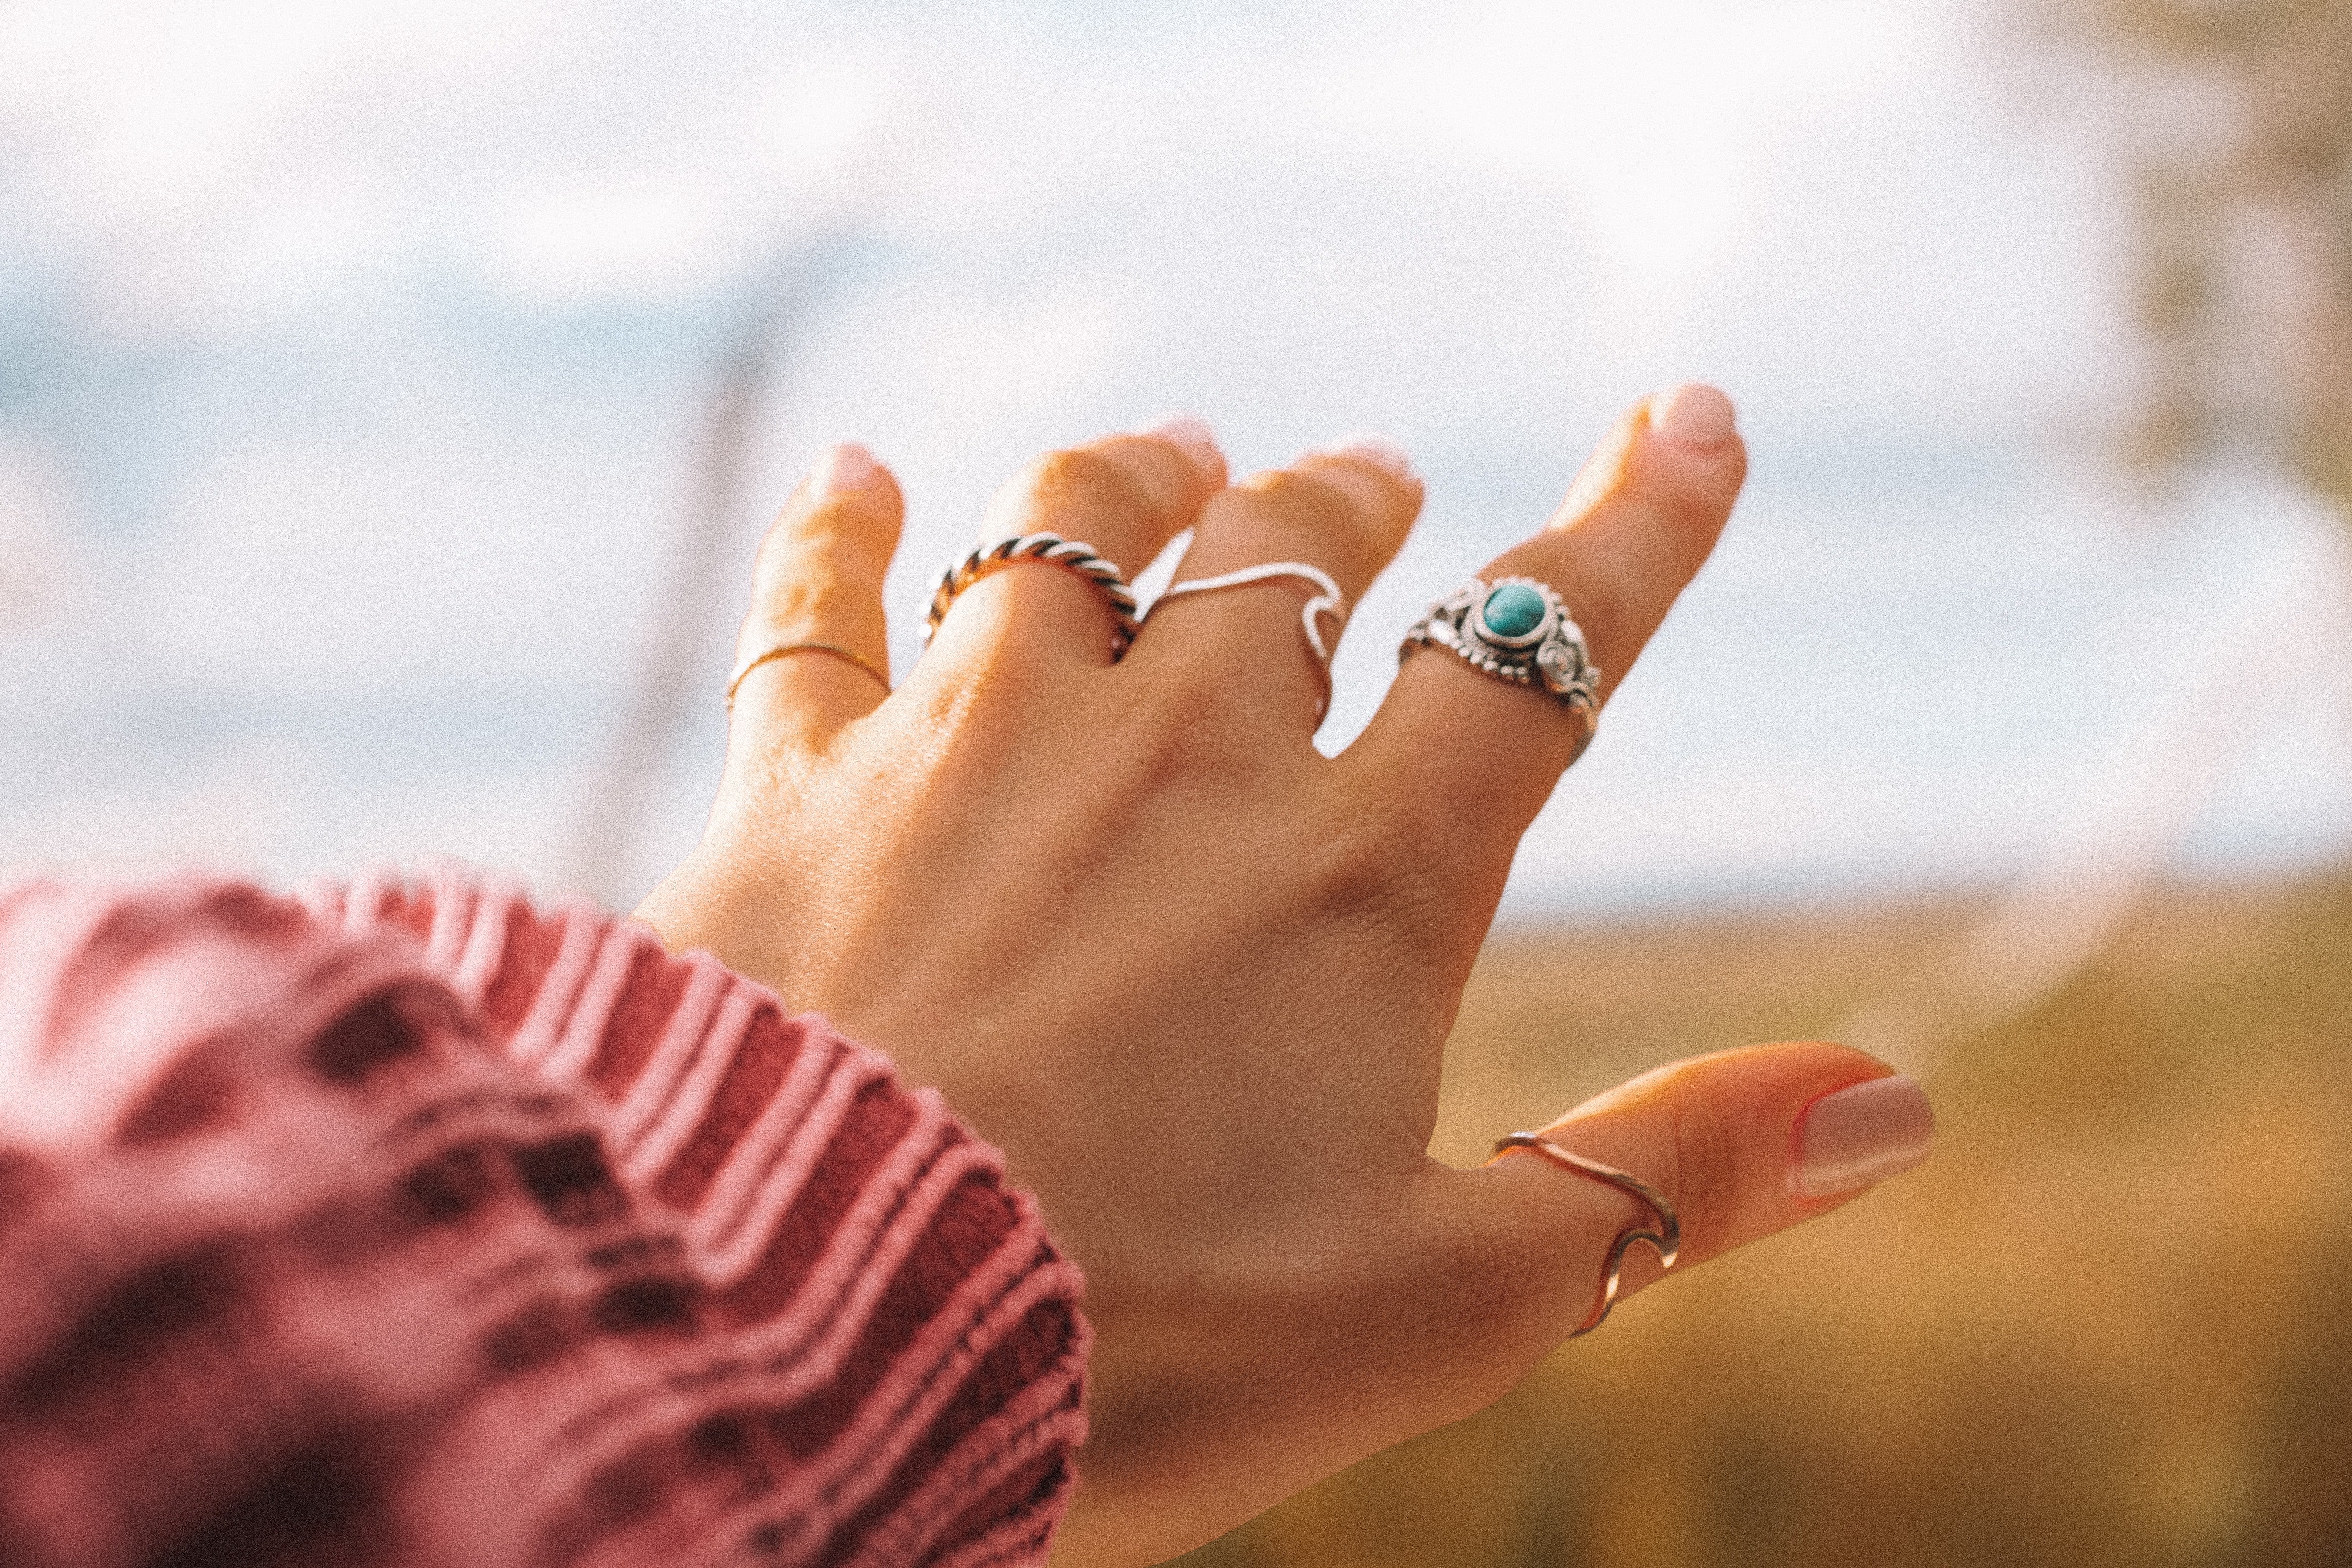 hand of woman wearing old rose sweater and silver rings in all fingers